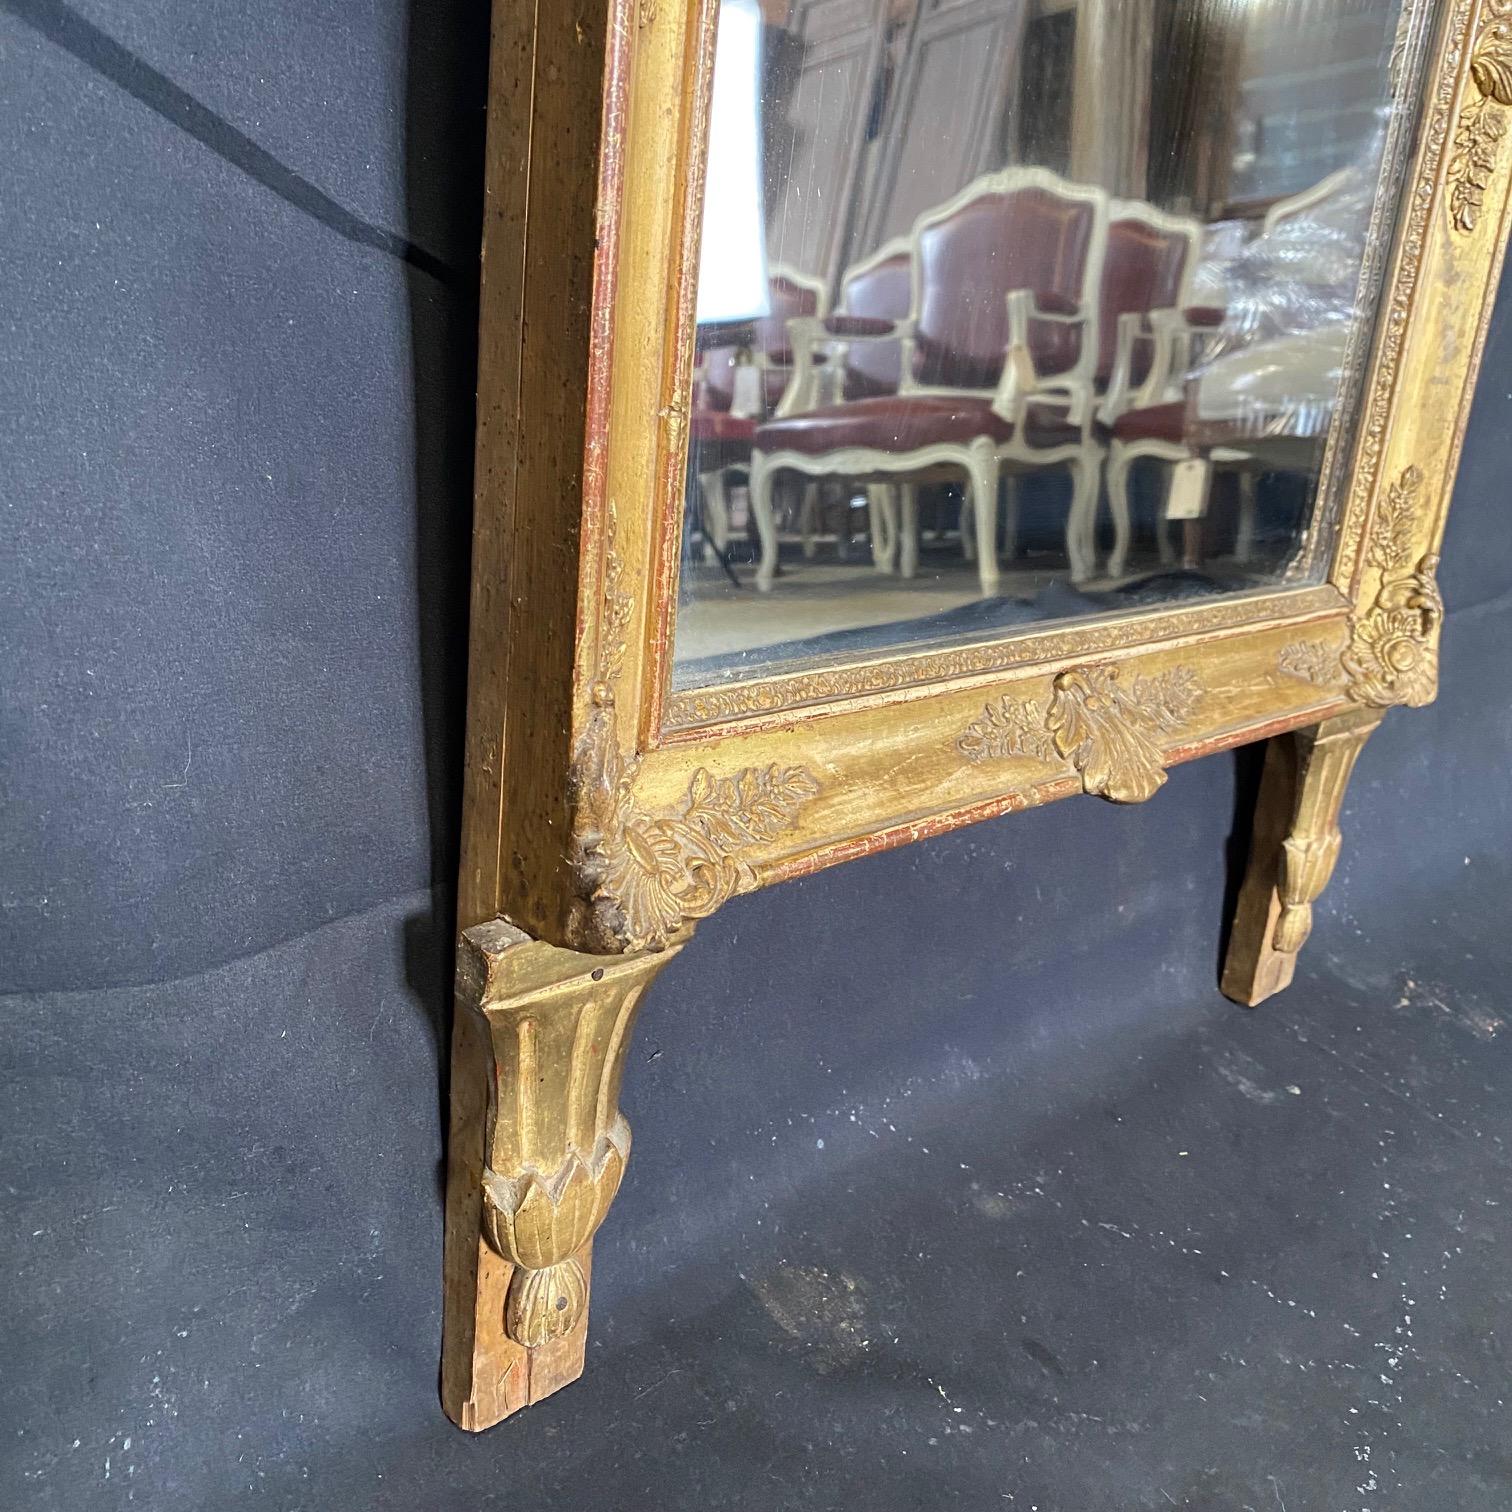 Rare Gem French Antique Louis XVI Mirror with Intricate Fronton Carving  In Good Condition For Sale In Hopewell, NJ